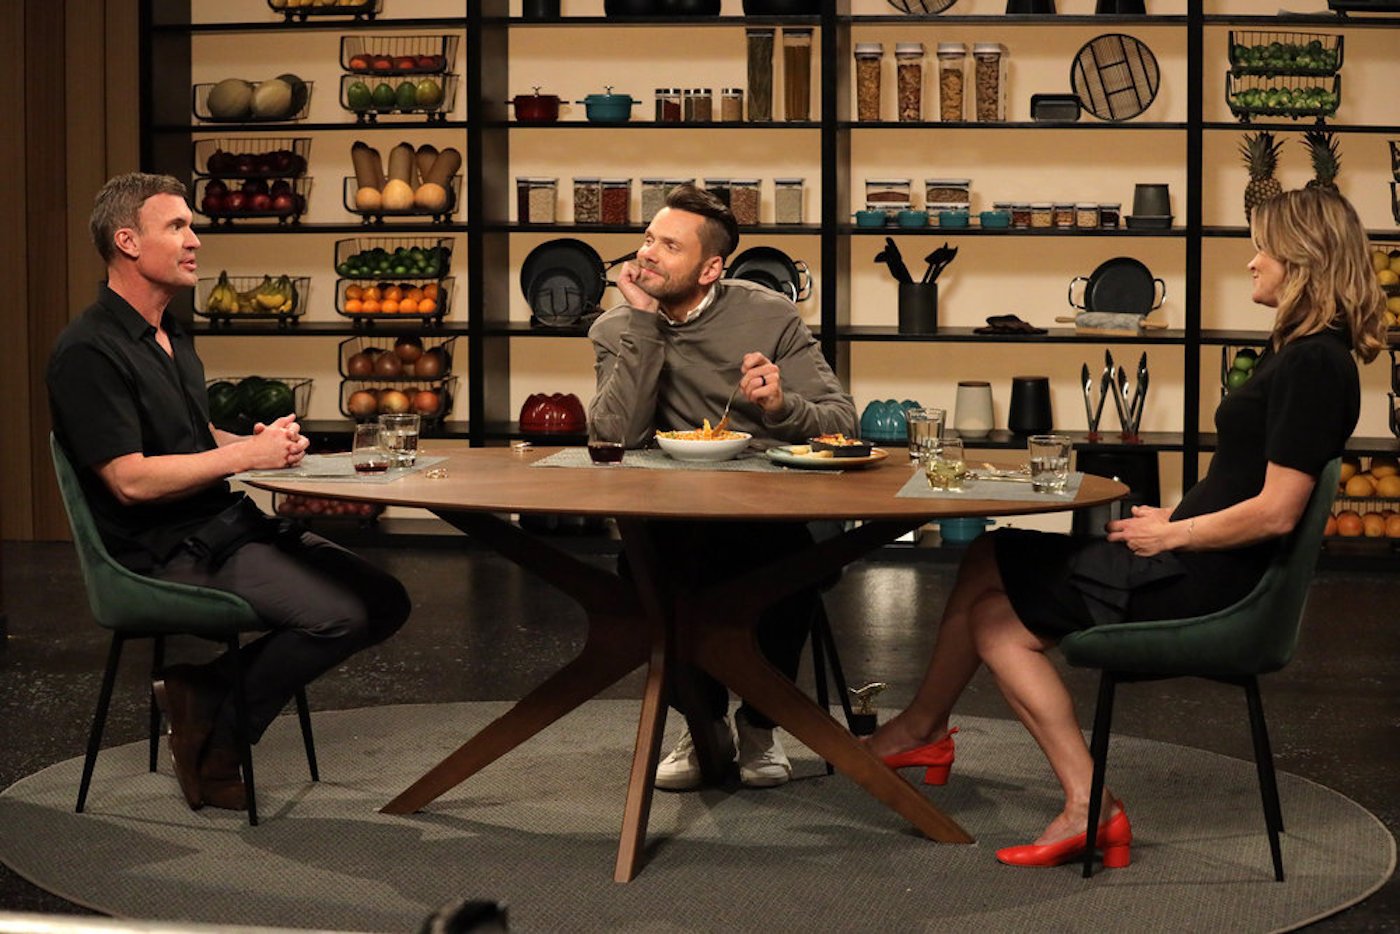 Celebrity Beef host Joel McHale sits at a table and eats pasta in between Jeff Lewis and Miss Pyle